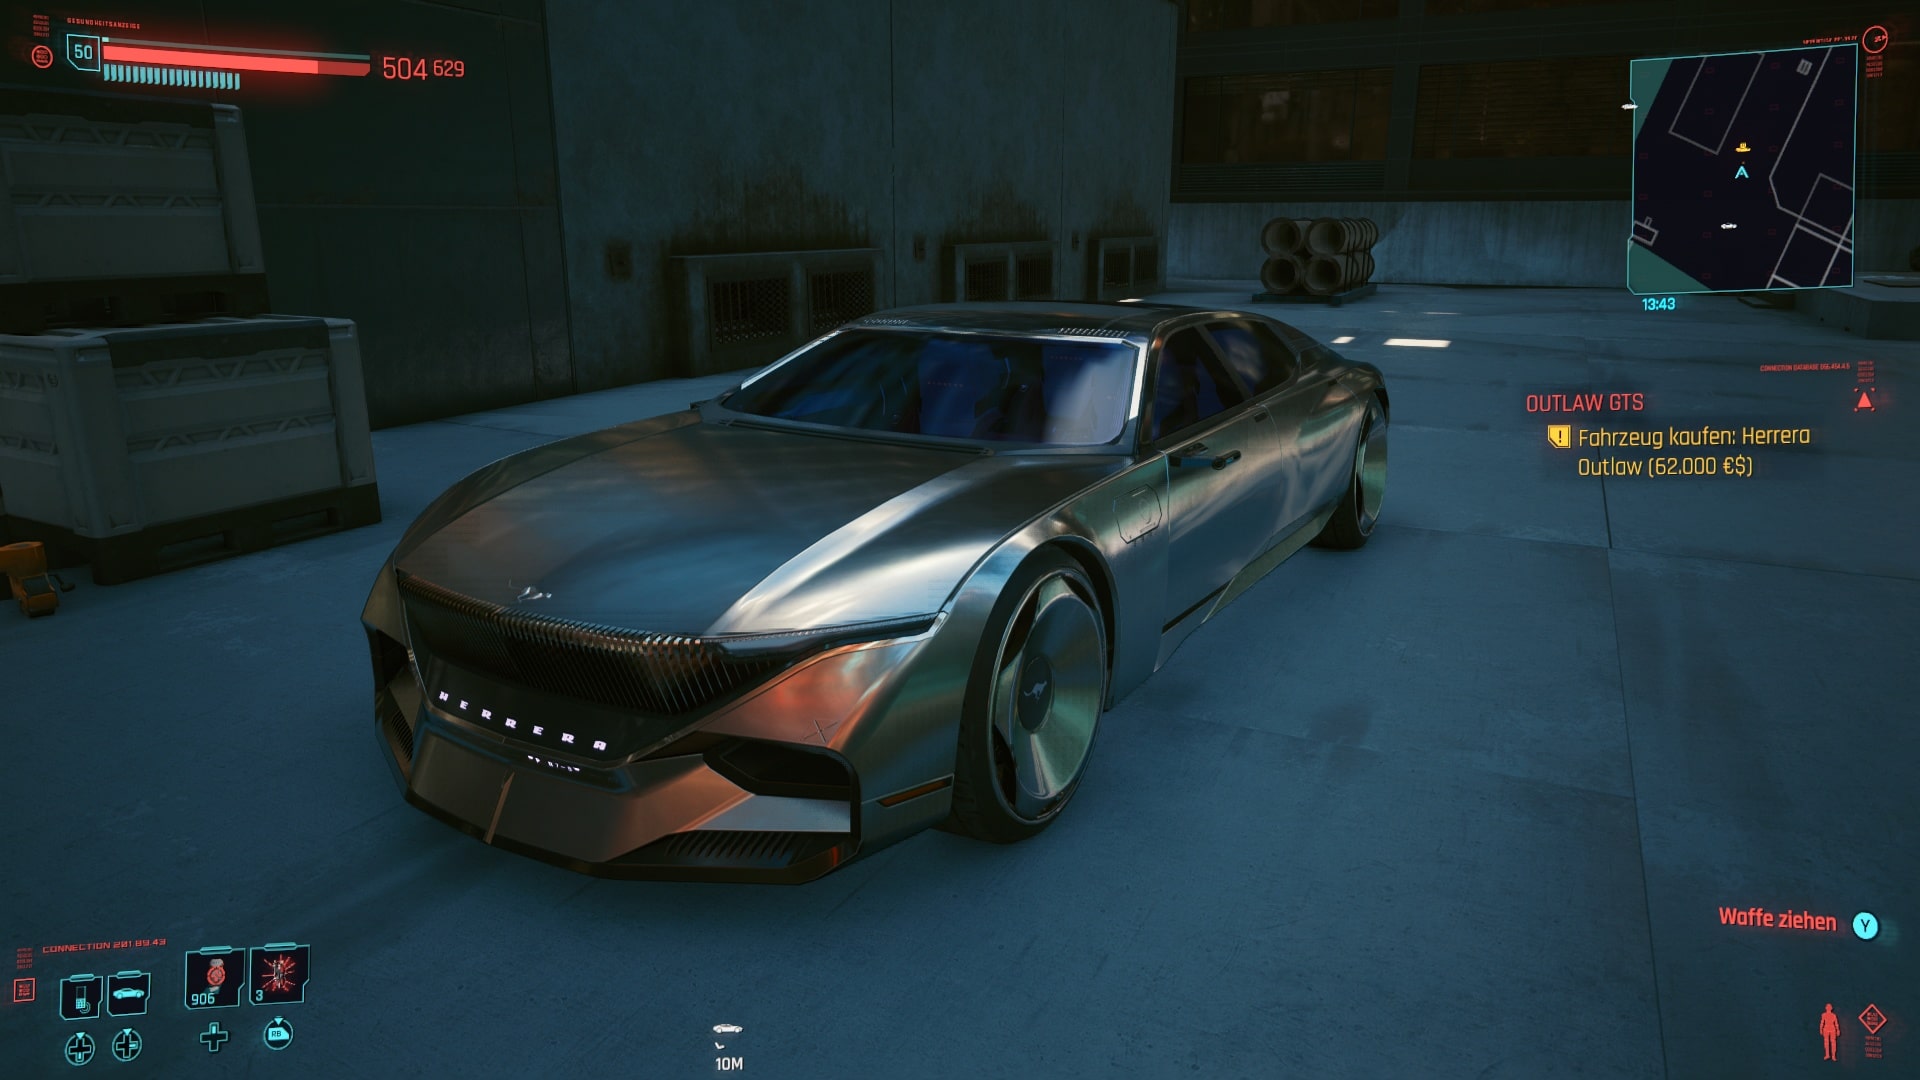 I'm slowly becoming addicted to collecting vehicles in Cyberpunk 2077, because the new driving system is one of my personal highlights.